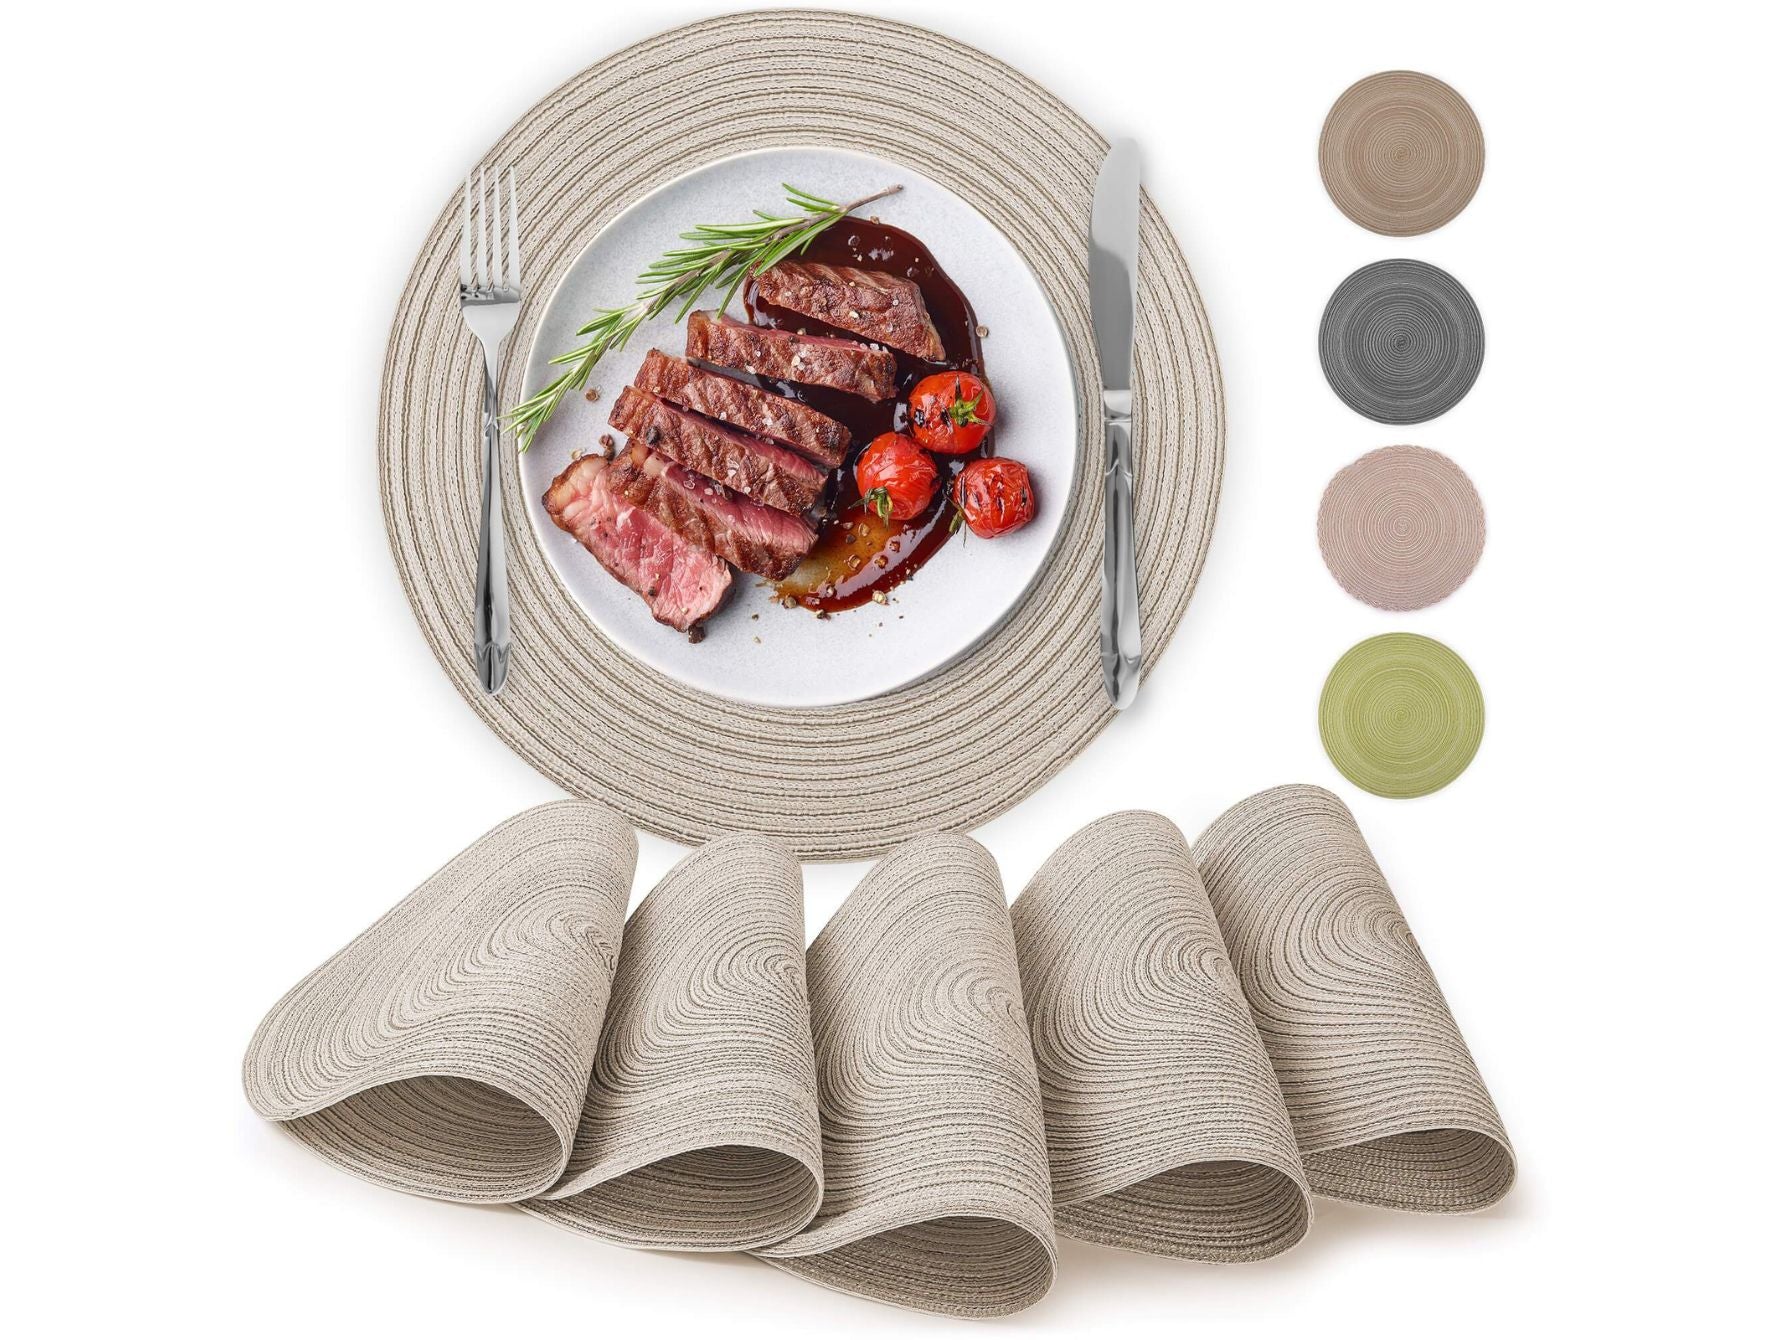 round placemats set of 6 by Zulay Kitchen